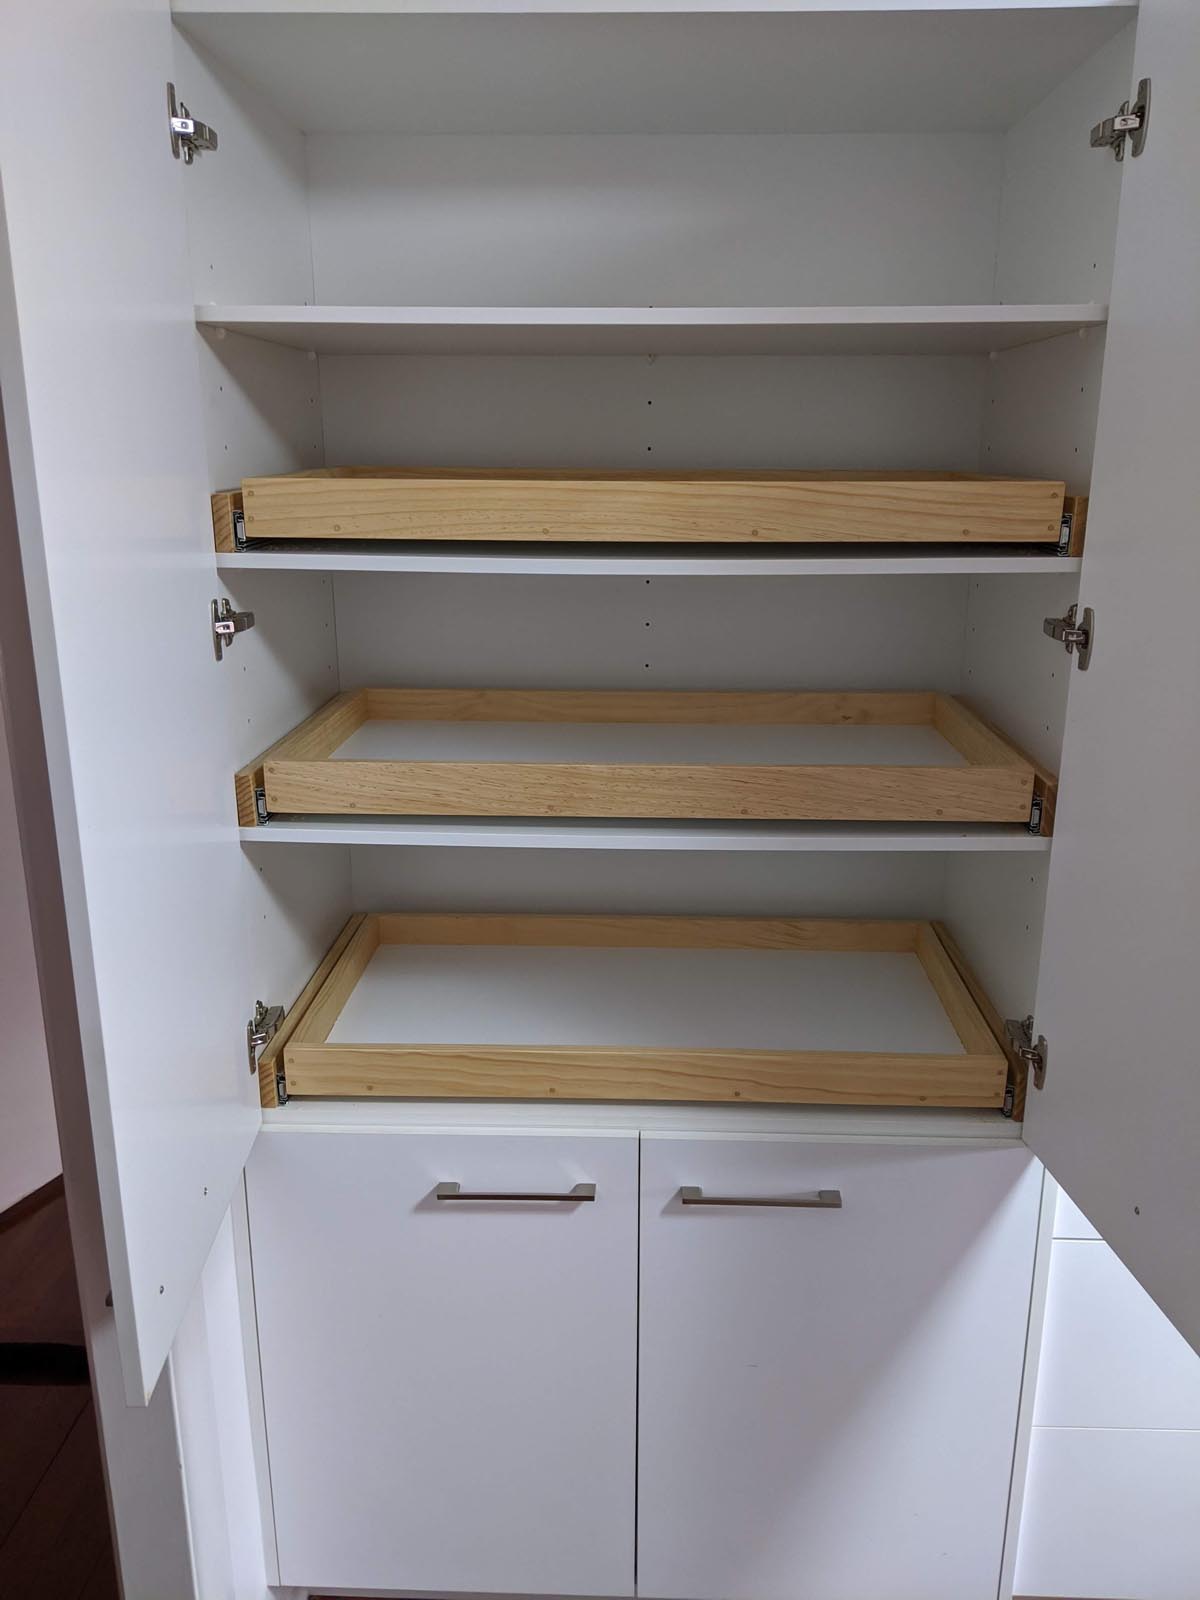 quality drawers for ease of use